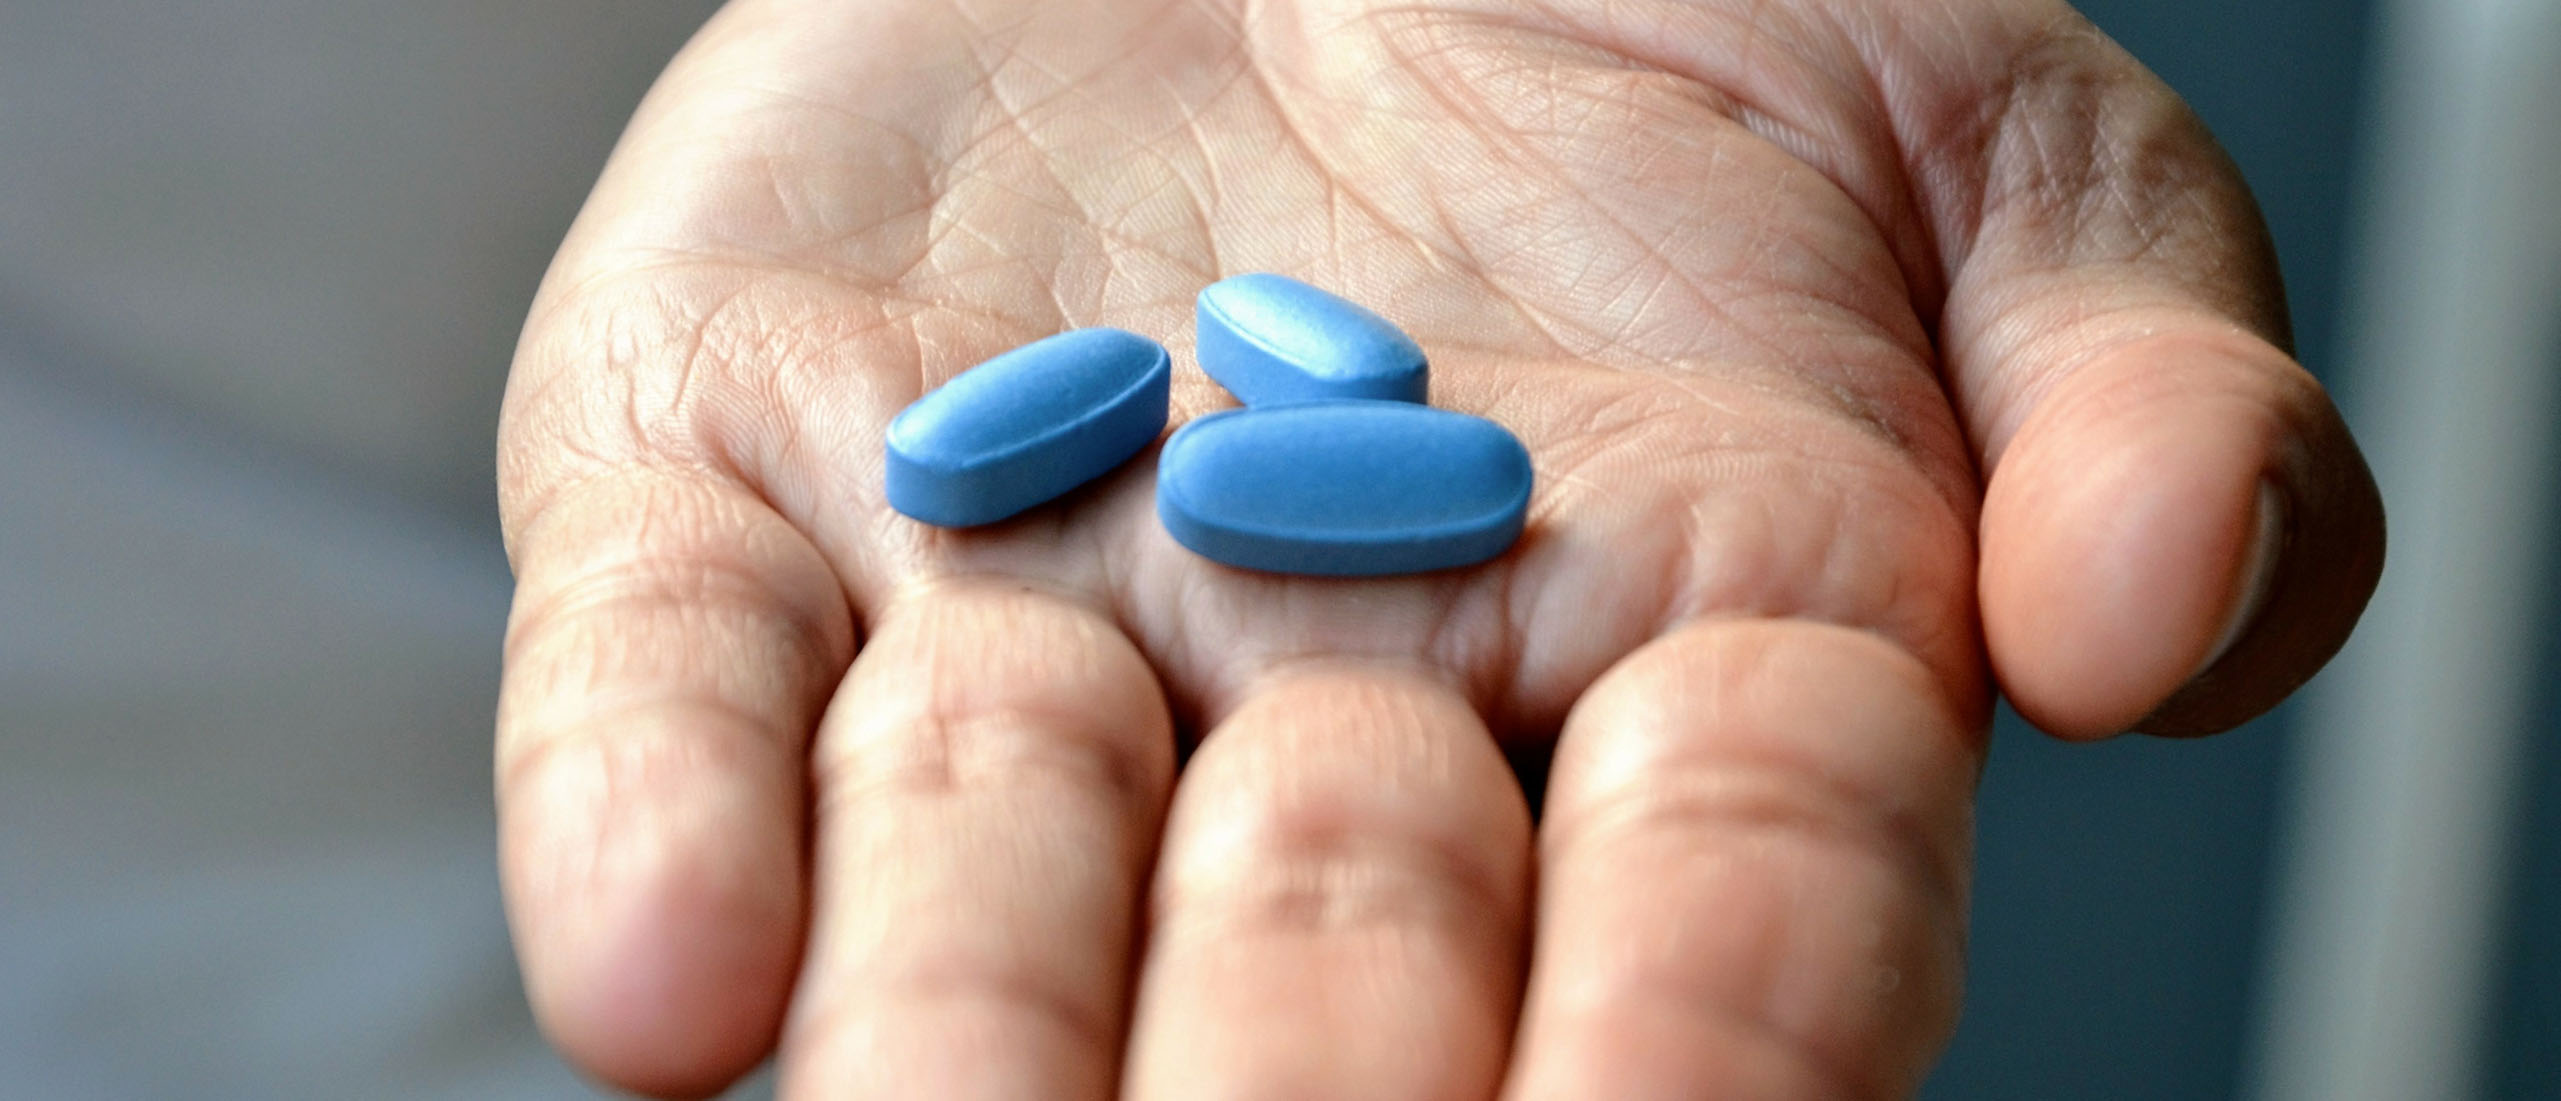 a handful of male enhacement pills